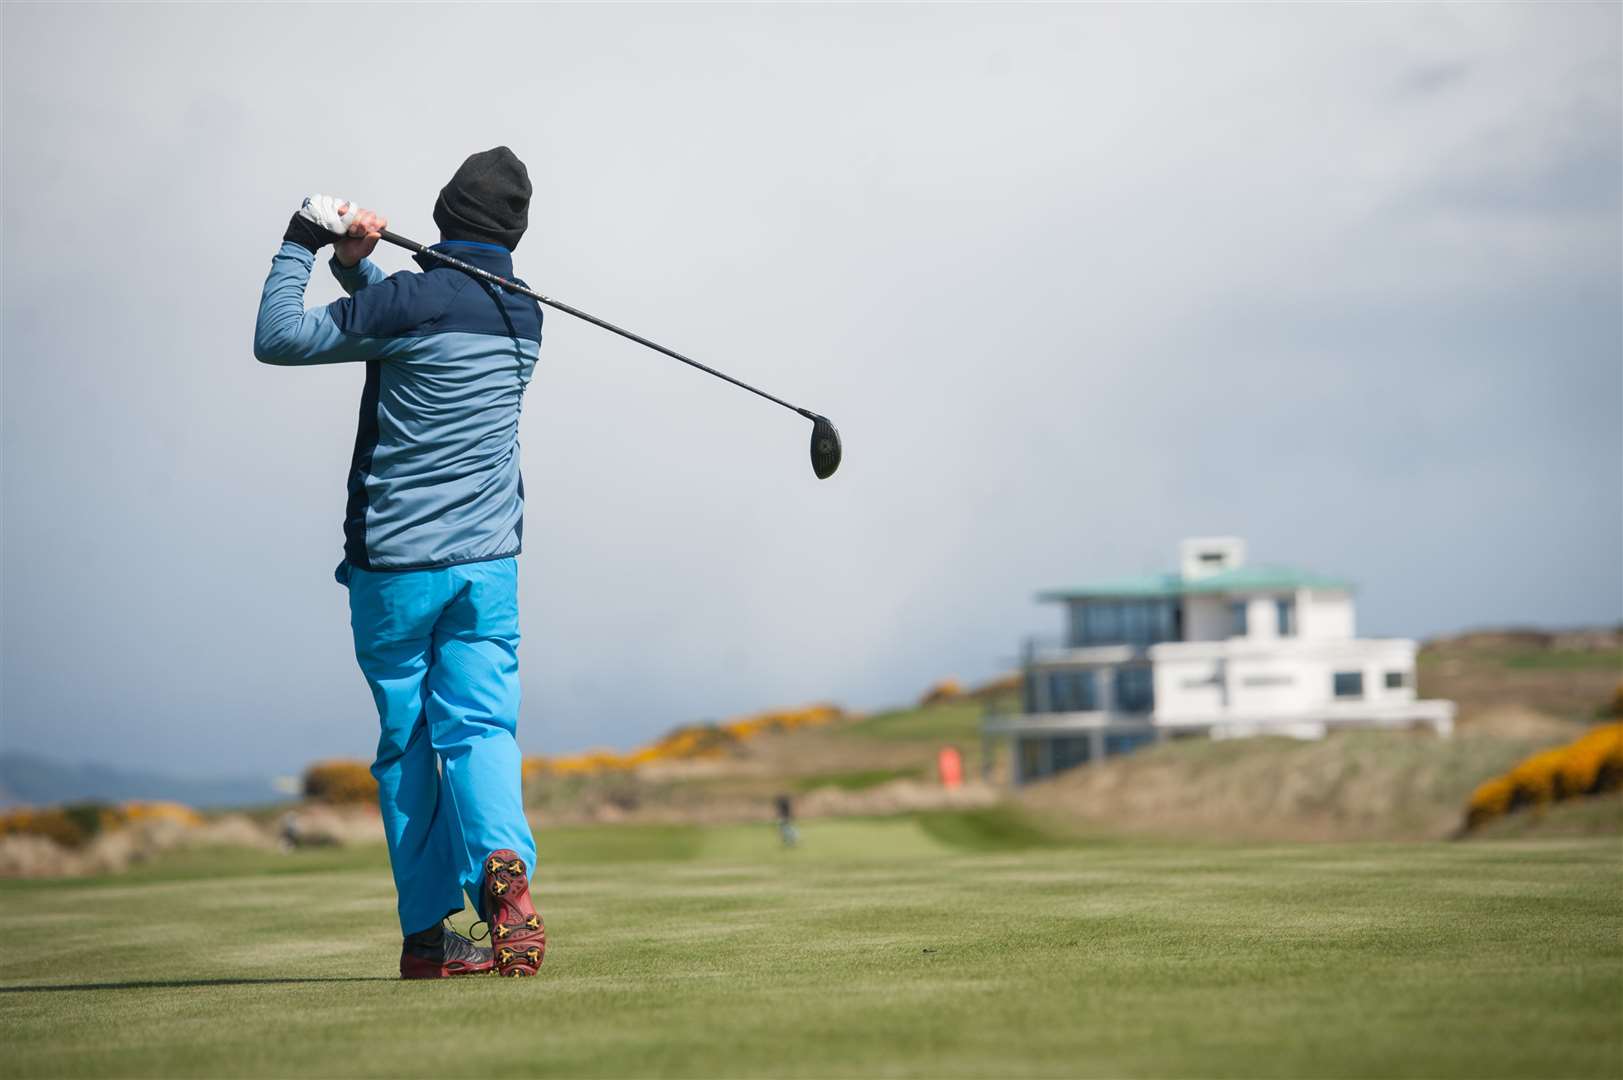 Castle Stuart came in at 66 in the GOLF world rankings. Picture: Callum Mackay